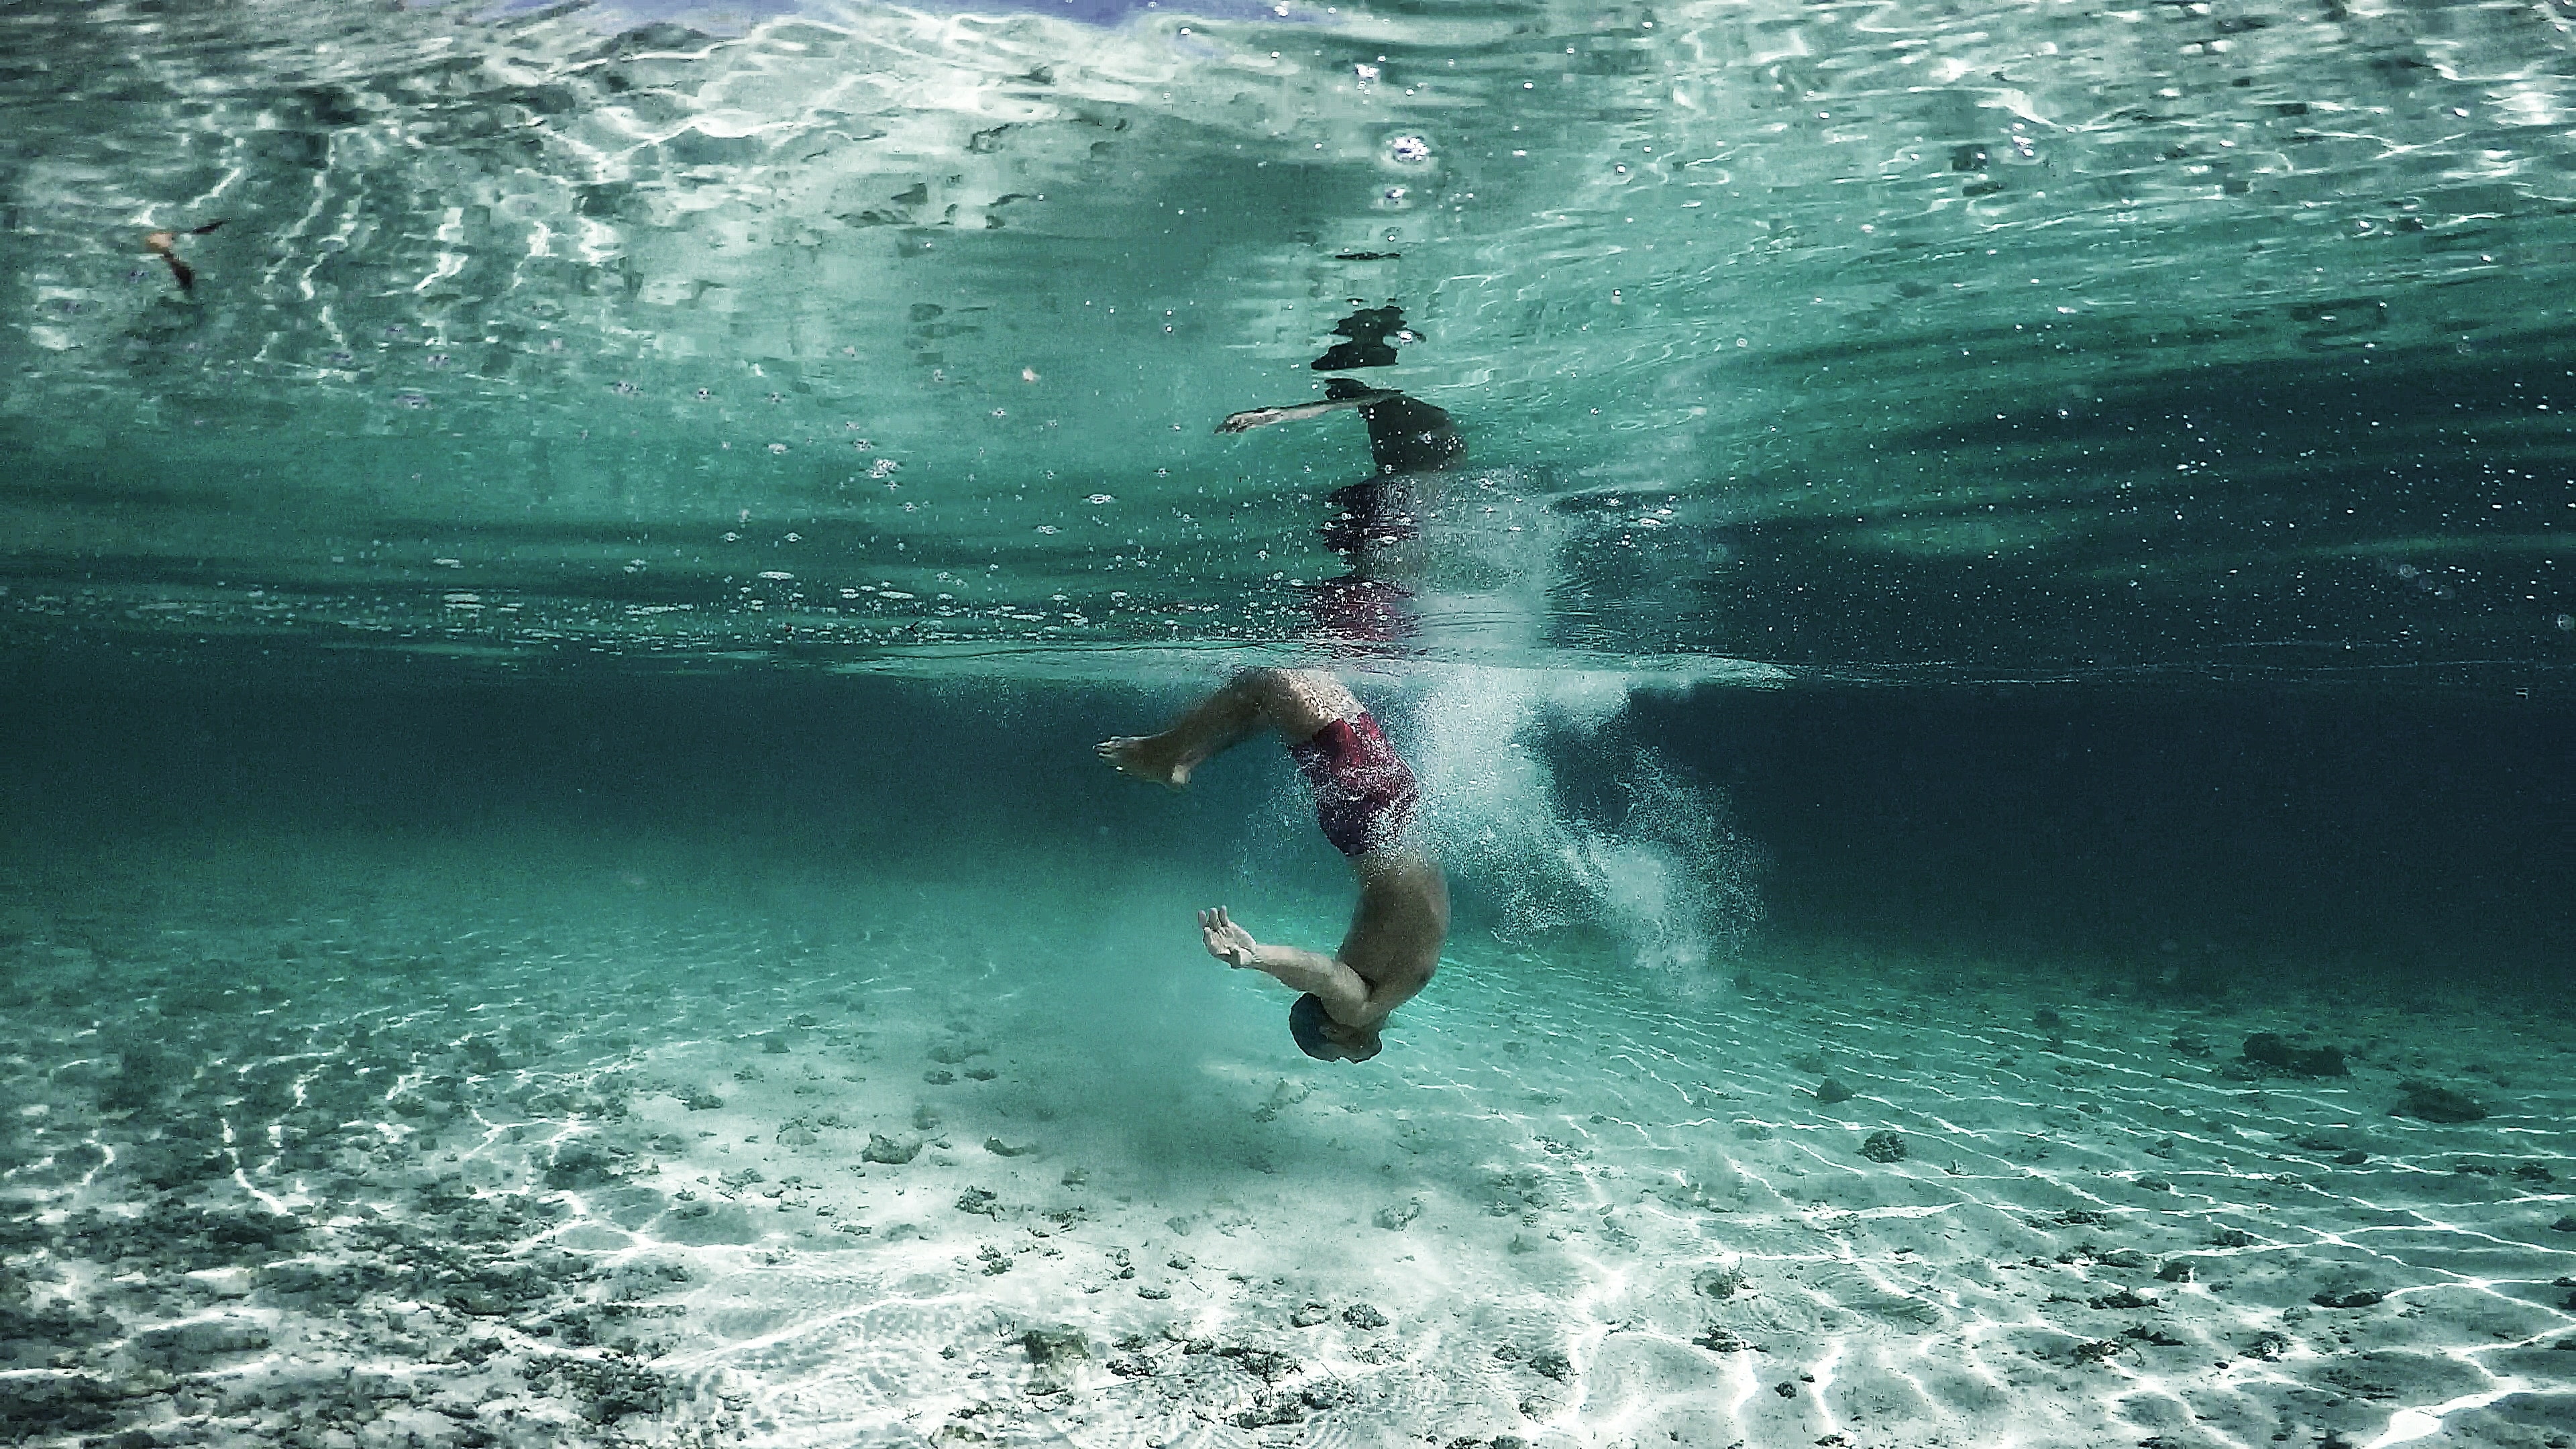 A man dives into shallow water that is crystal clear.